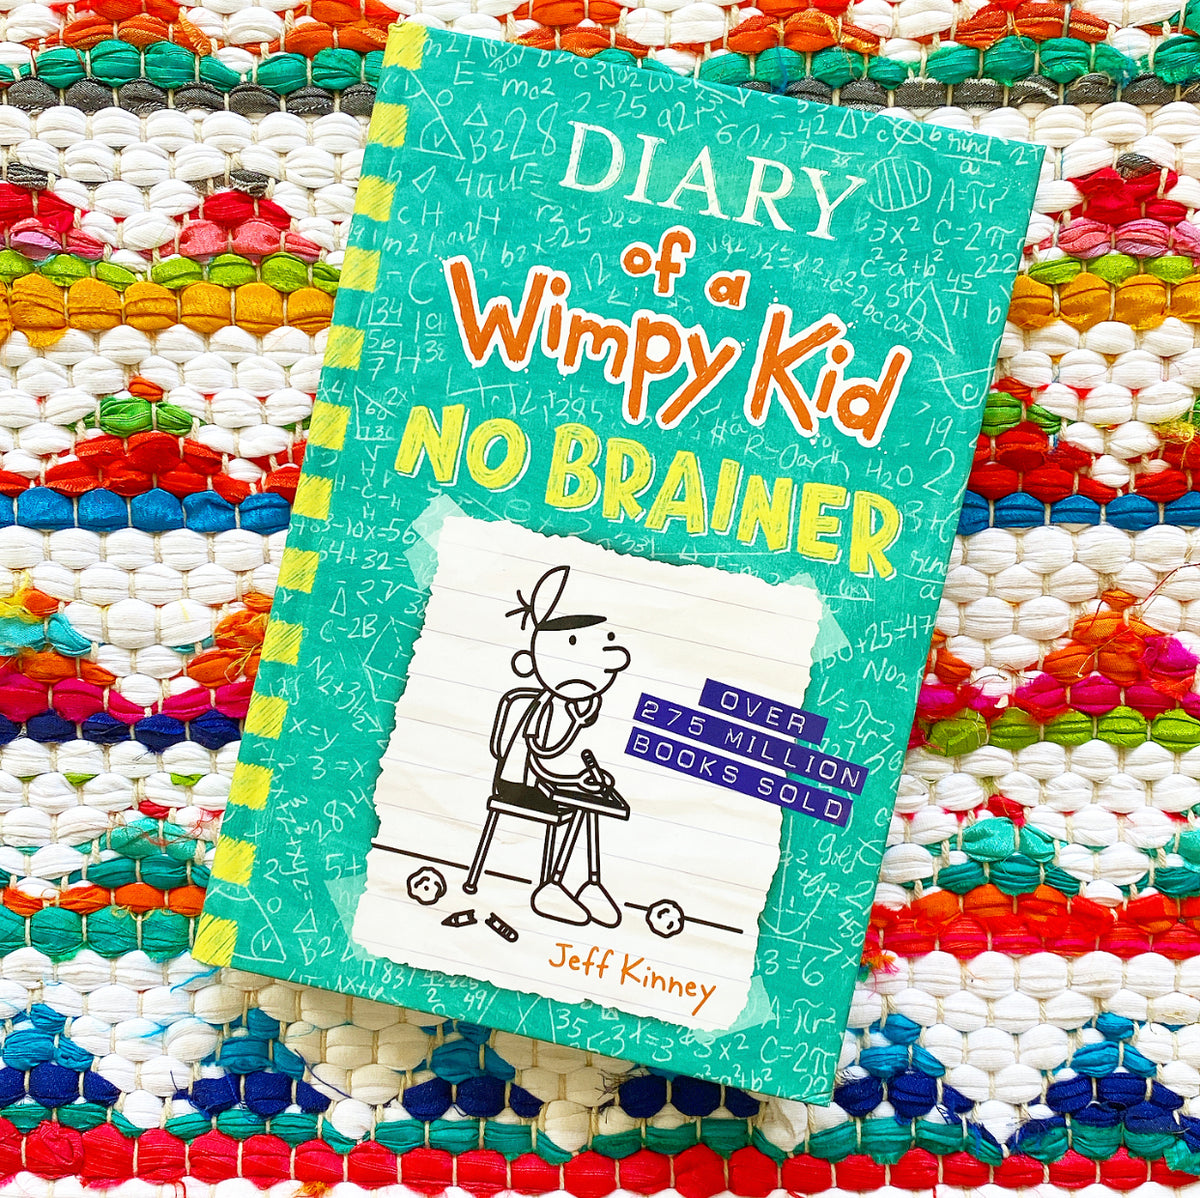 No Brainer (Diary of a Wimpy Kid Book 18): Jeff Kinney